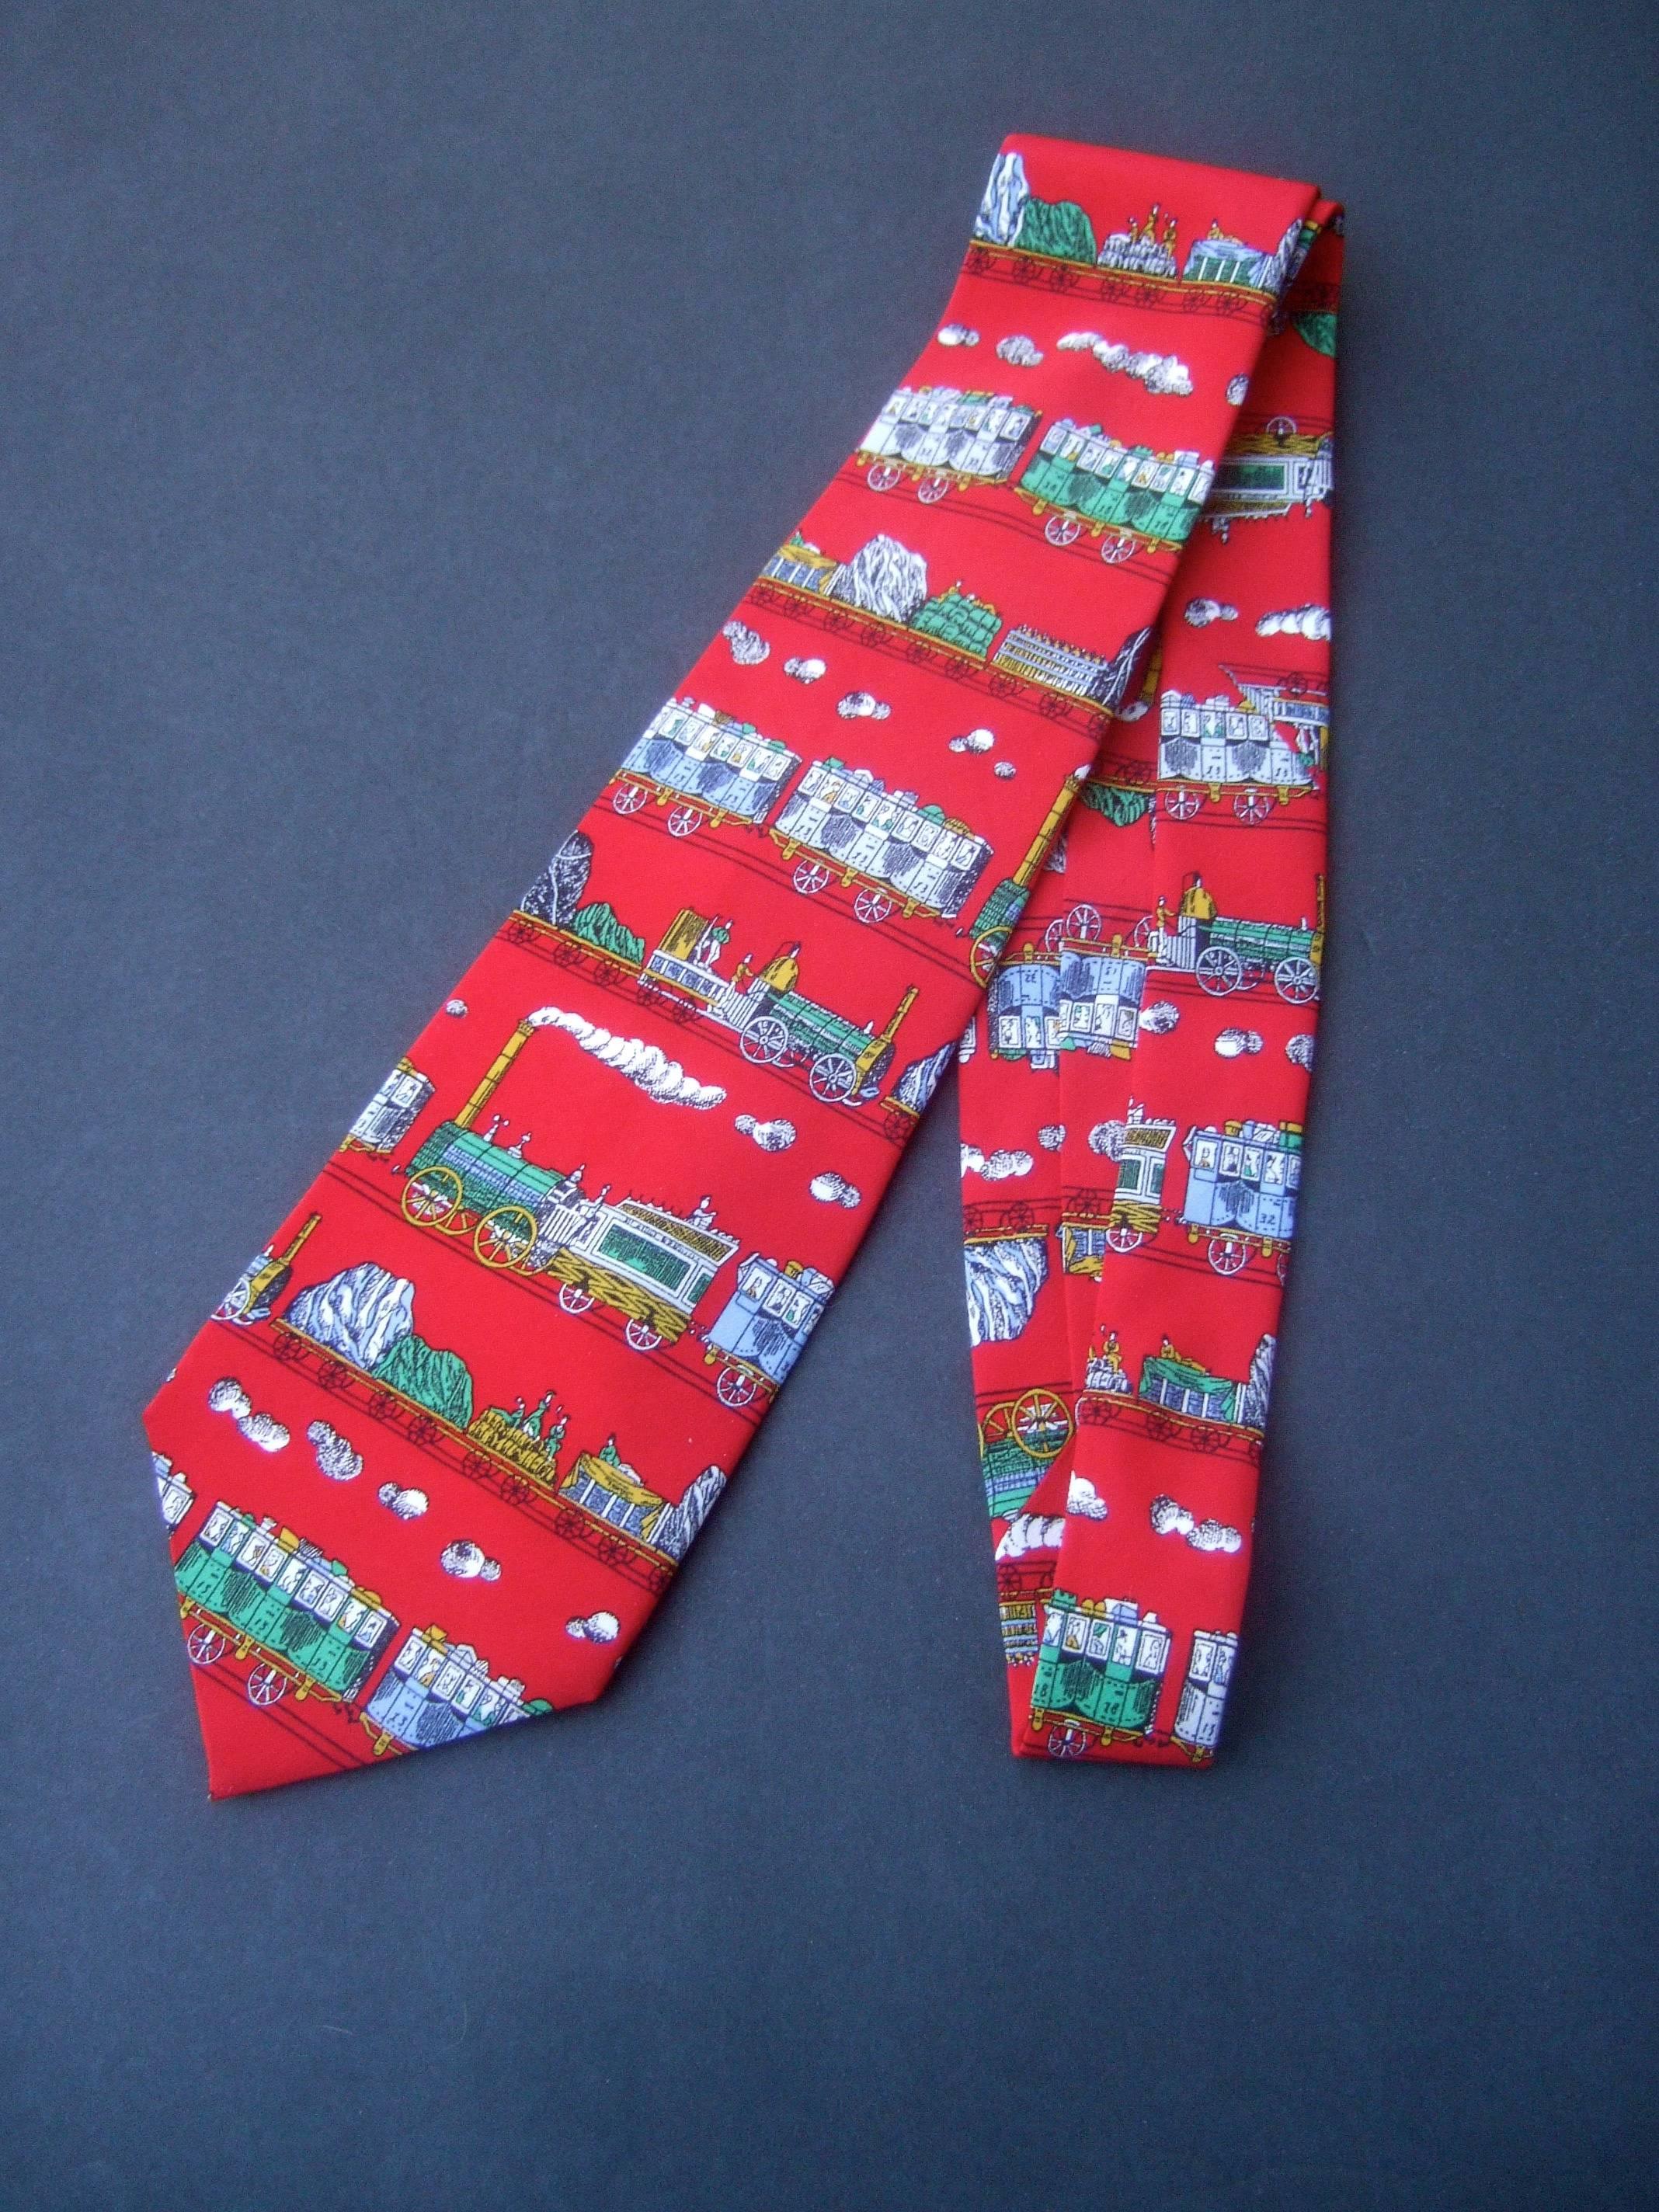 Fornasetti Italian silk locomotive train necktie c 1990s
The whimsical Italian necktie is illustrated with a series
of vintage style train cars 

The collection of train cars are set against a vibrant
red silk background

Makes a stylish bold